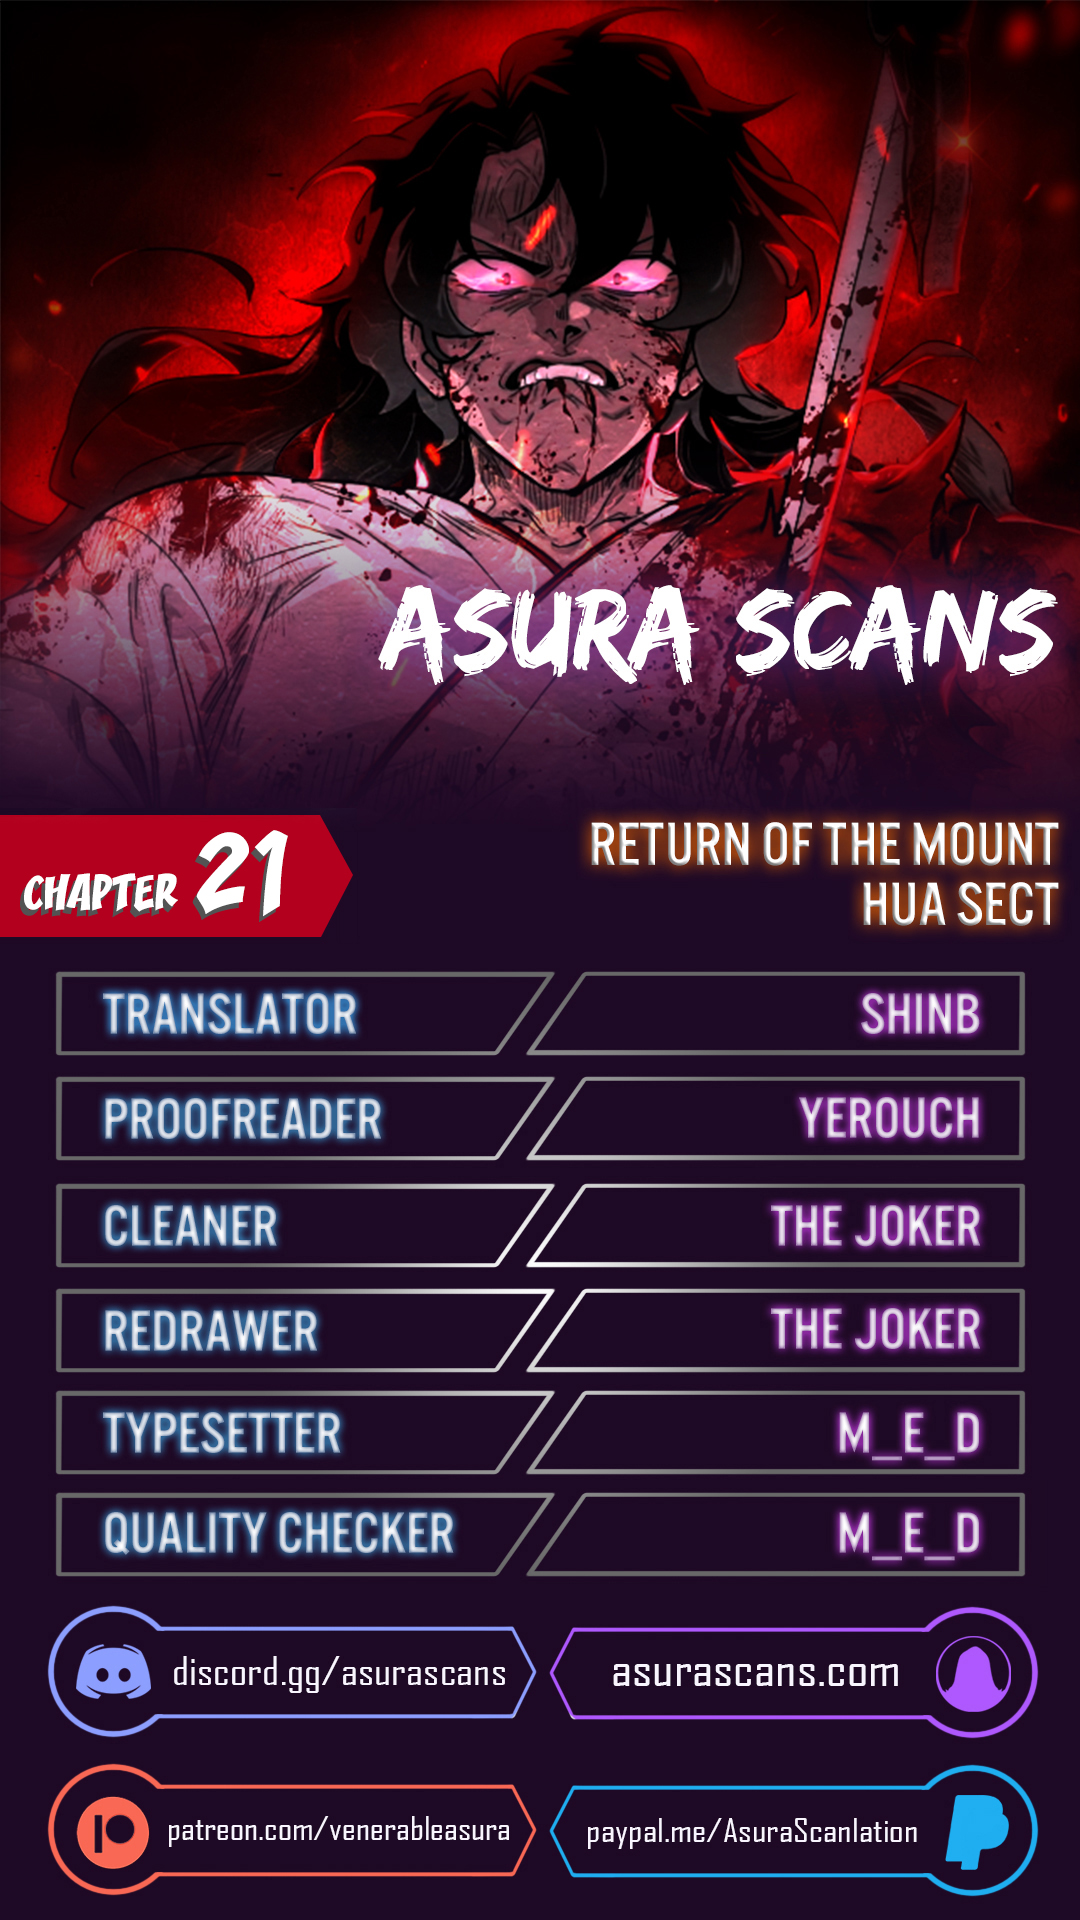 Return of the Mount Hua Sect - Chapter 11645 - Image 1